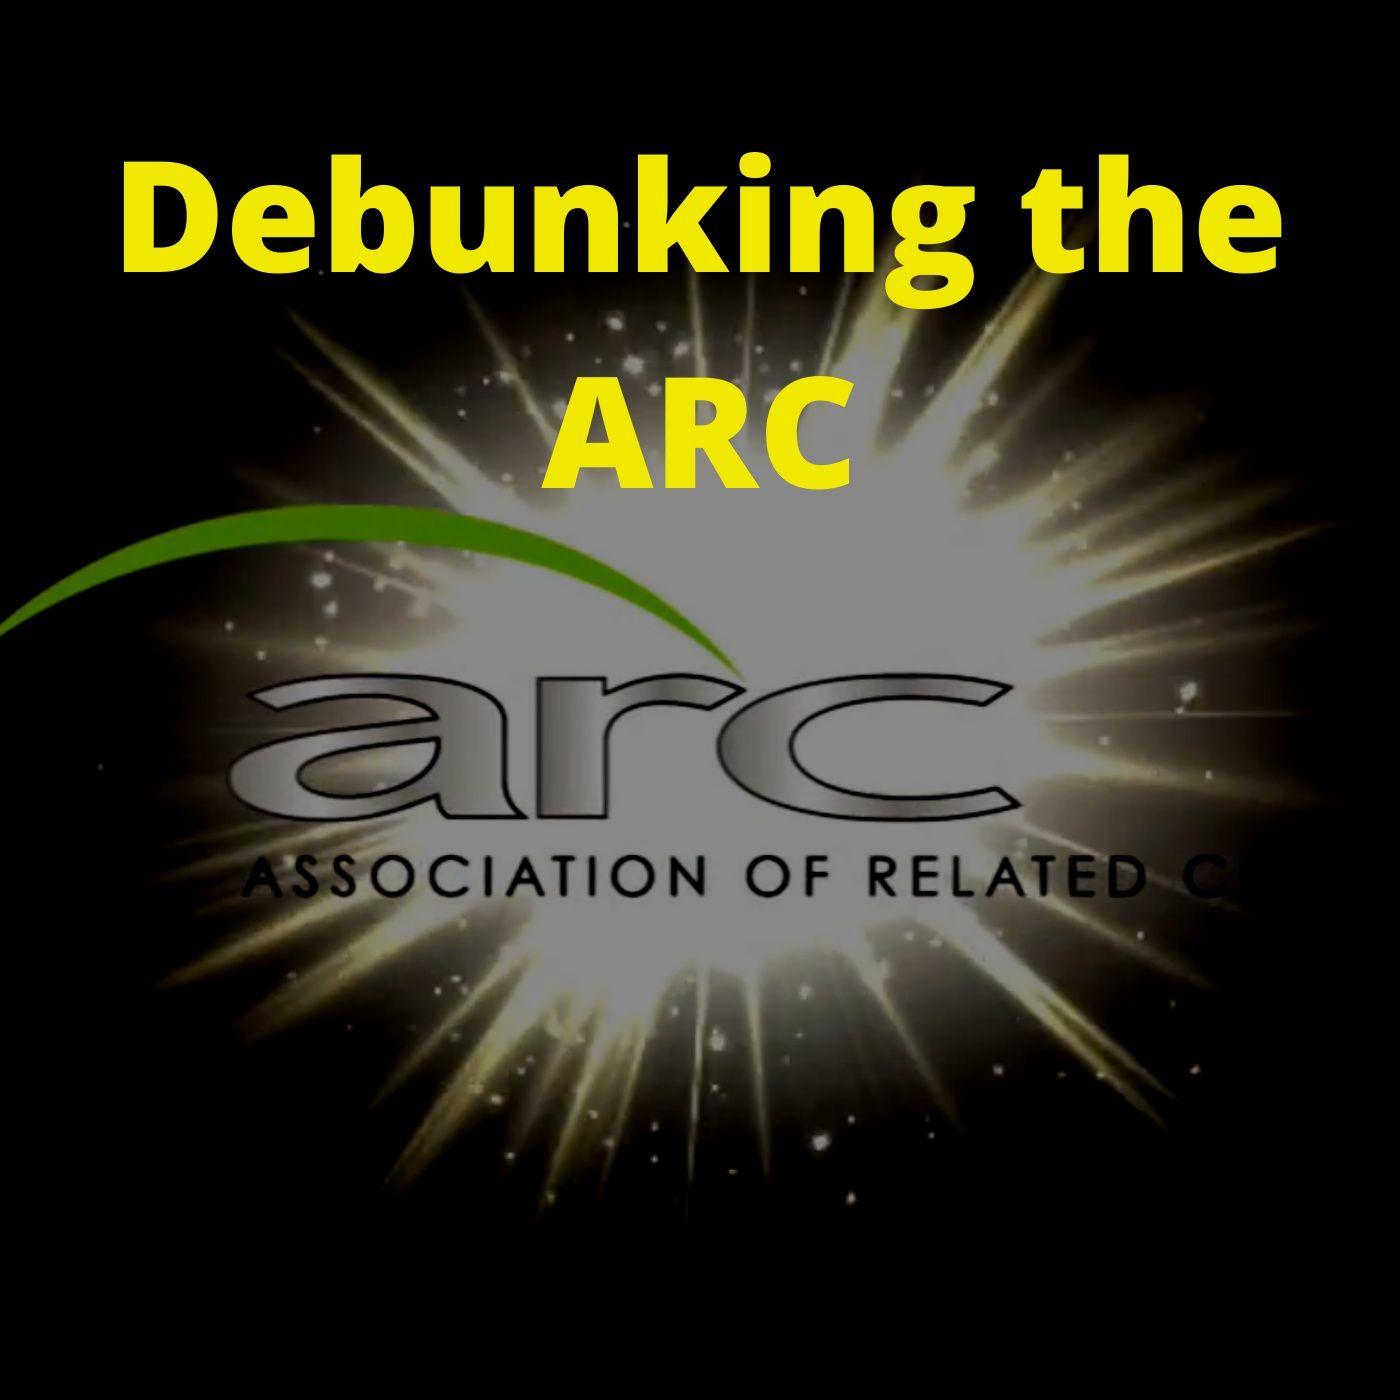 Debunking the ARC